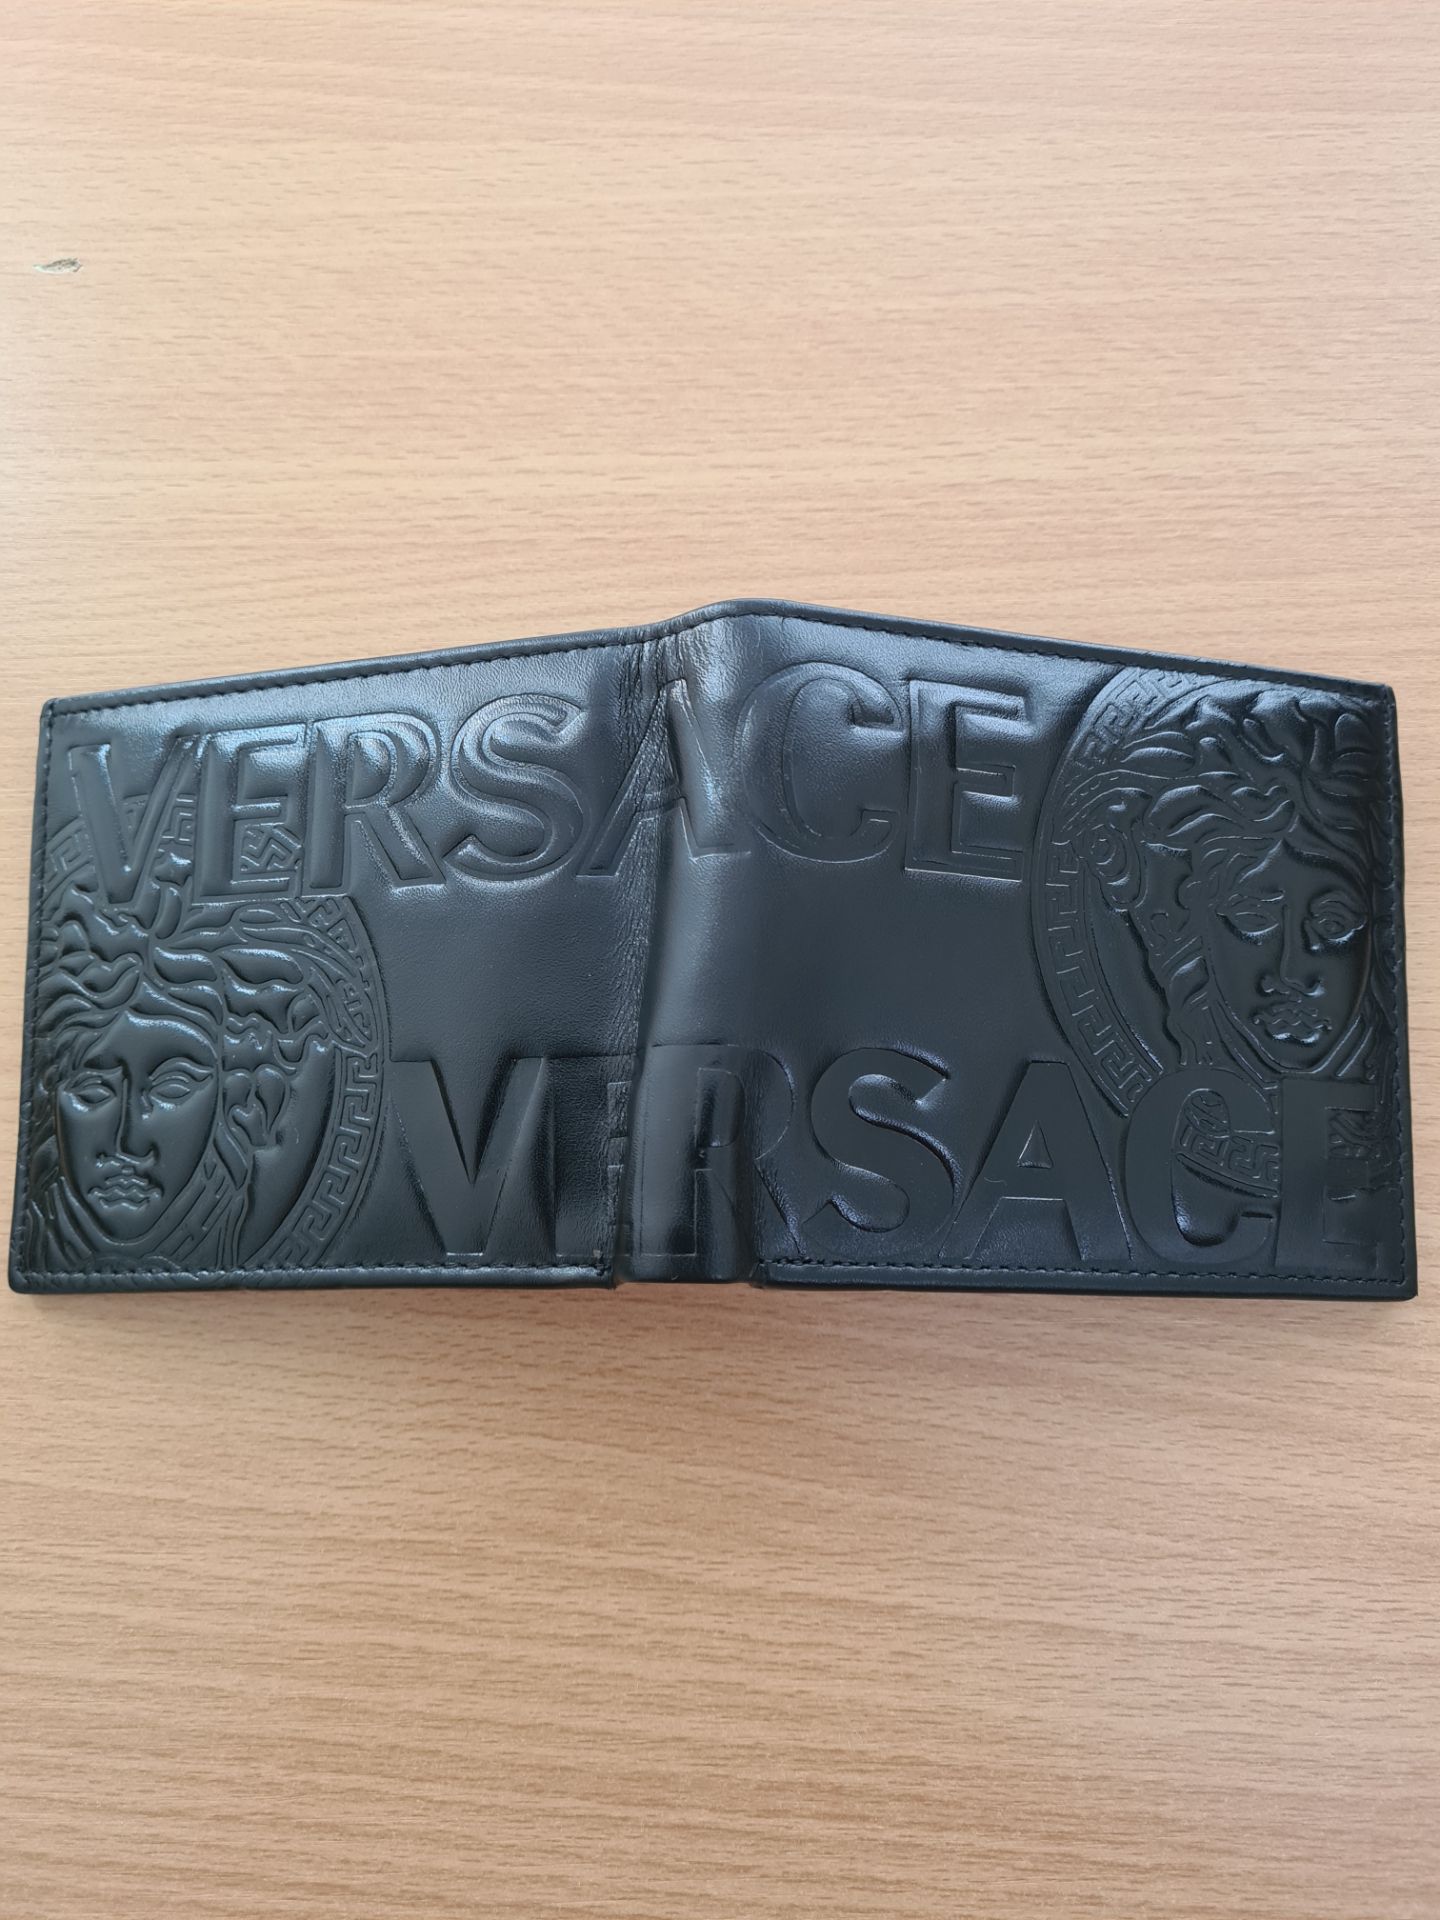 versace men's leather wallet - new with box - Image 3 of 8